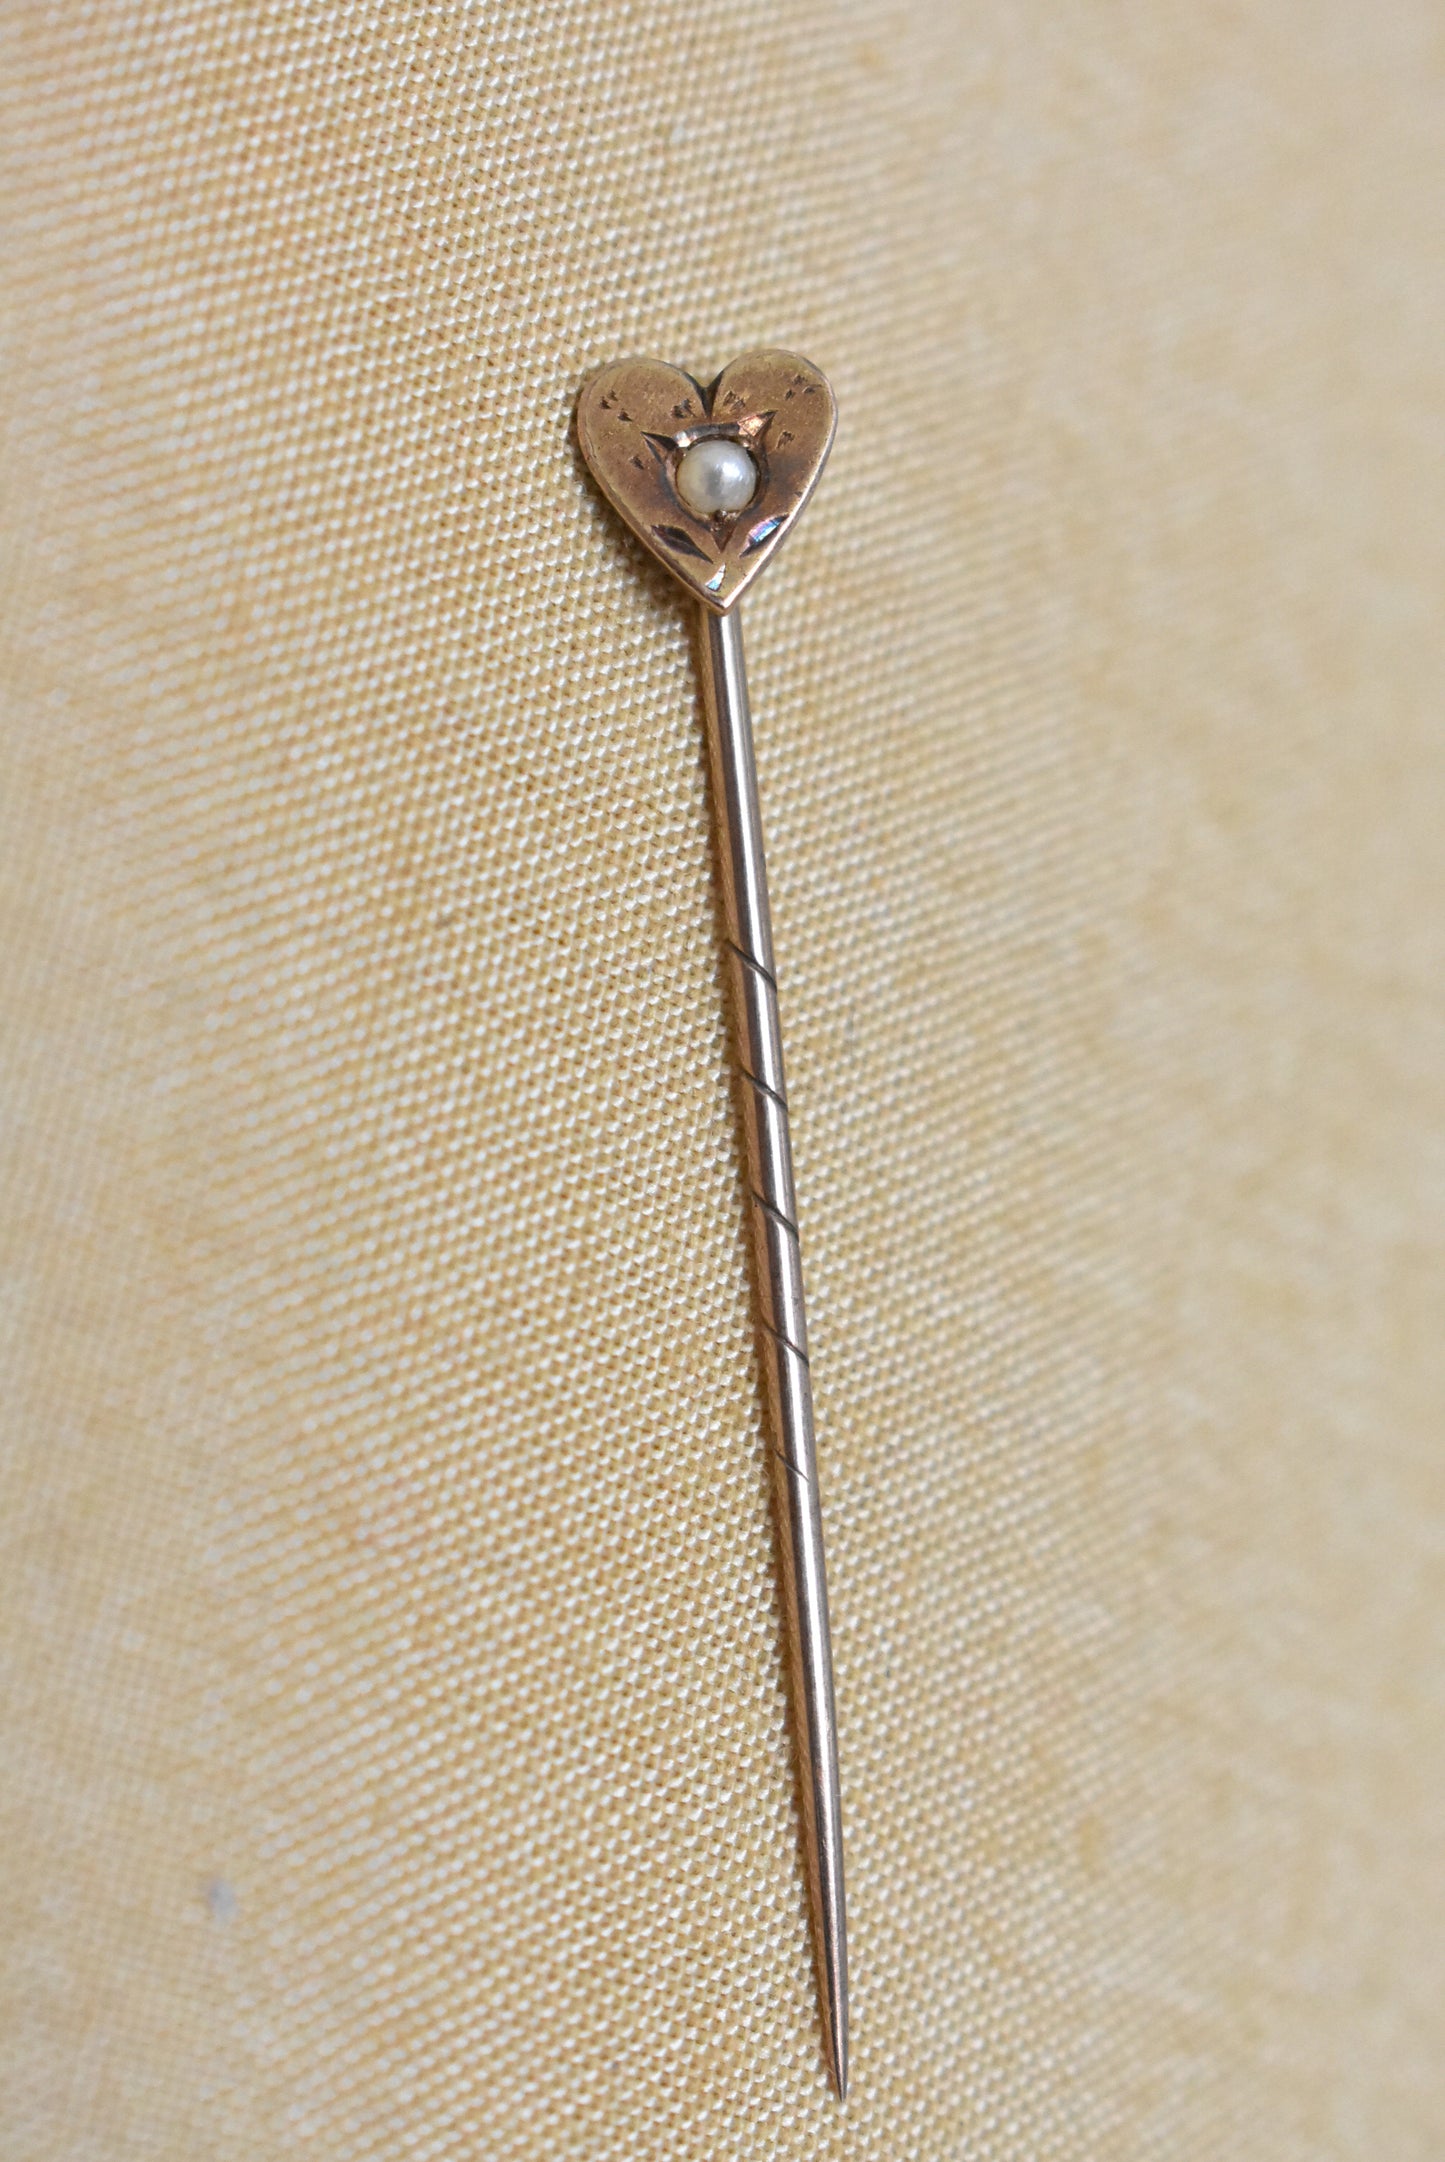 Vintage 14ct gold pin with real pearl